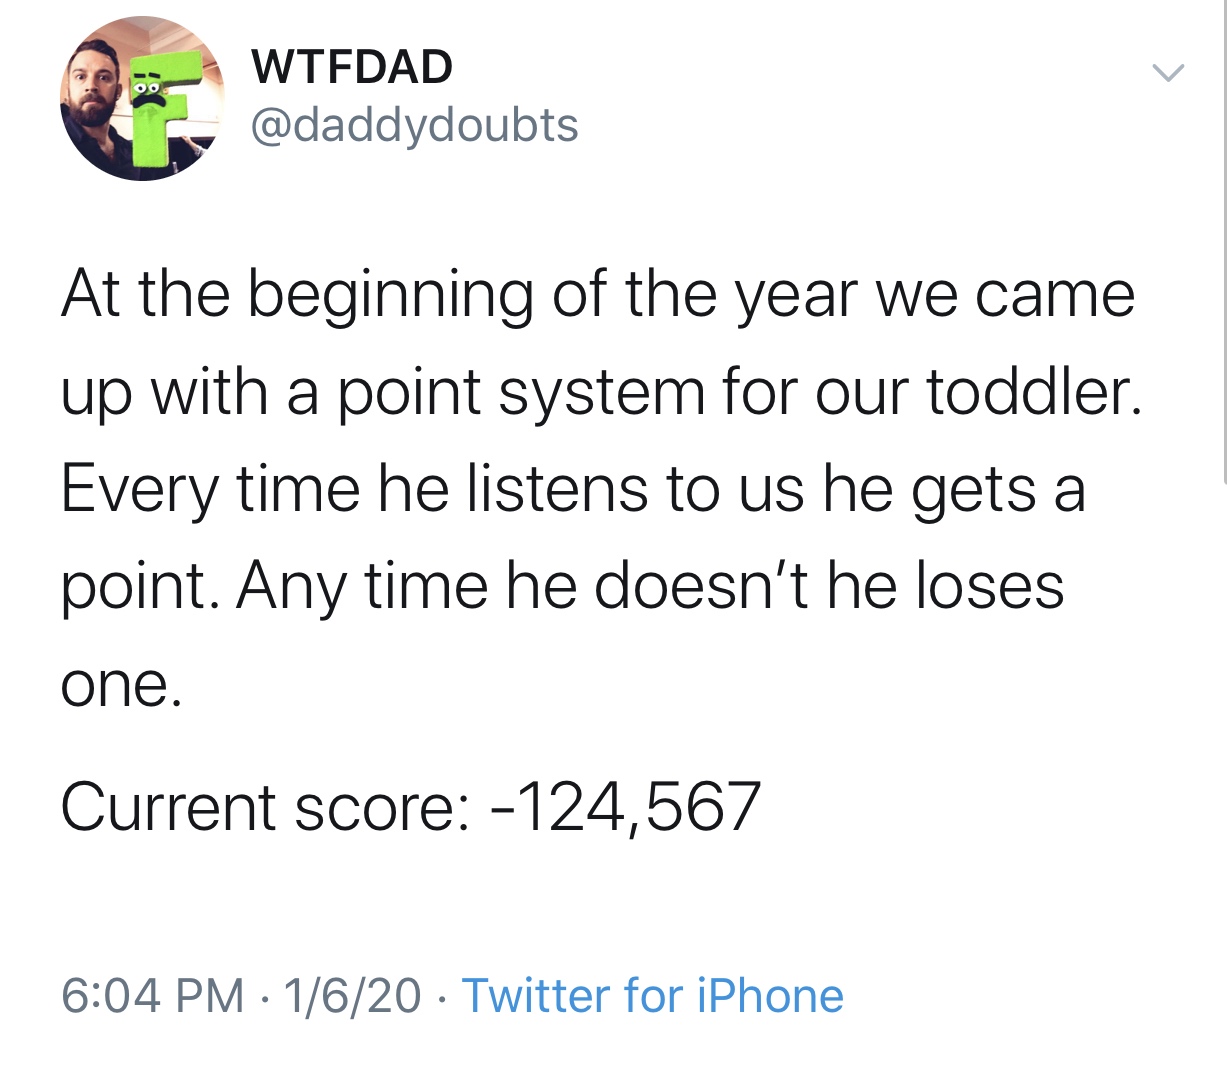 yum yum i ll have - Wtfdad At the beginning of the year we came up with a point system for our toddler. Every time he listens to us he gets a point. Any time he doesn't he loses one. Current score 124,567 1620 Twitter for iPhone